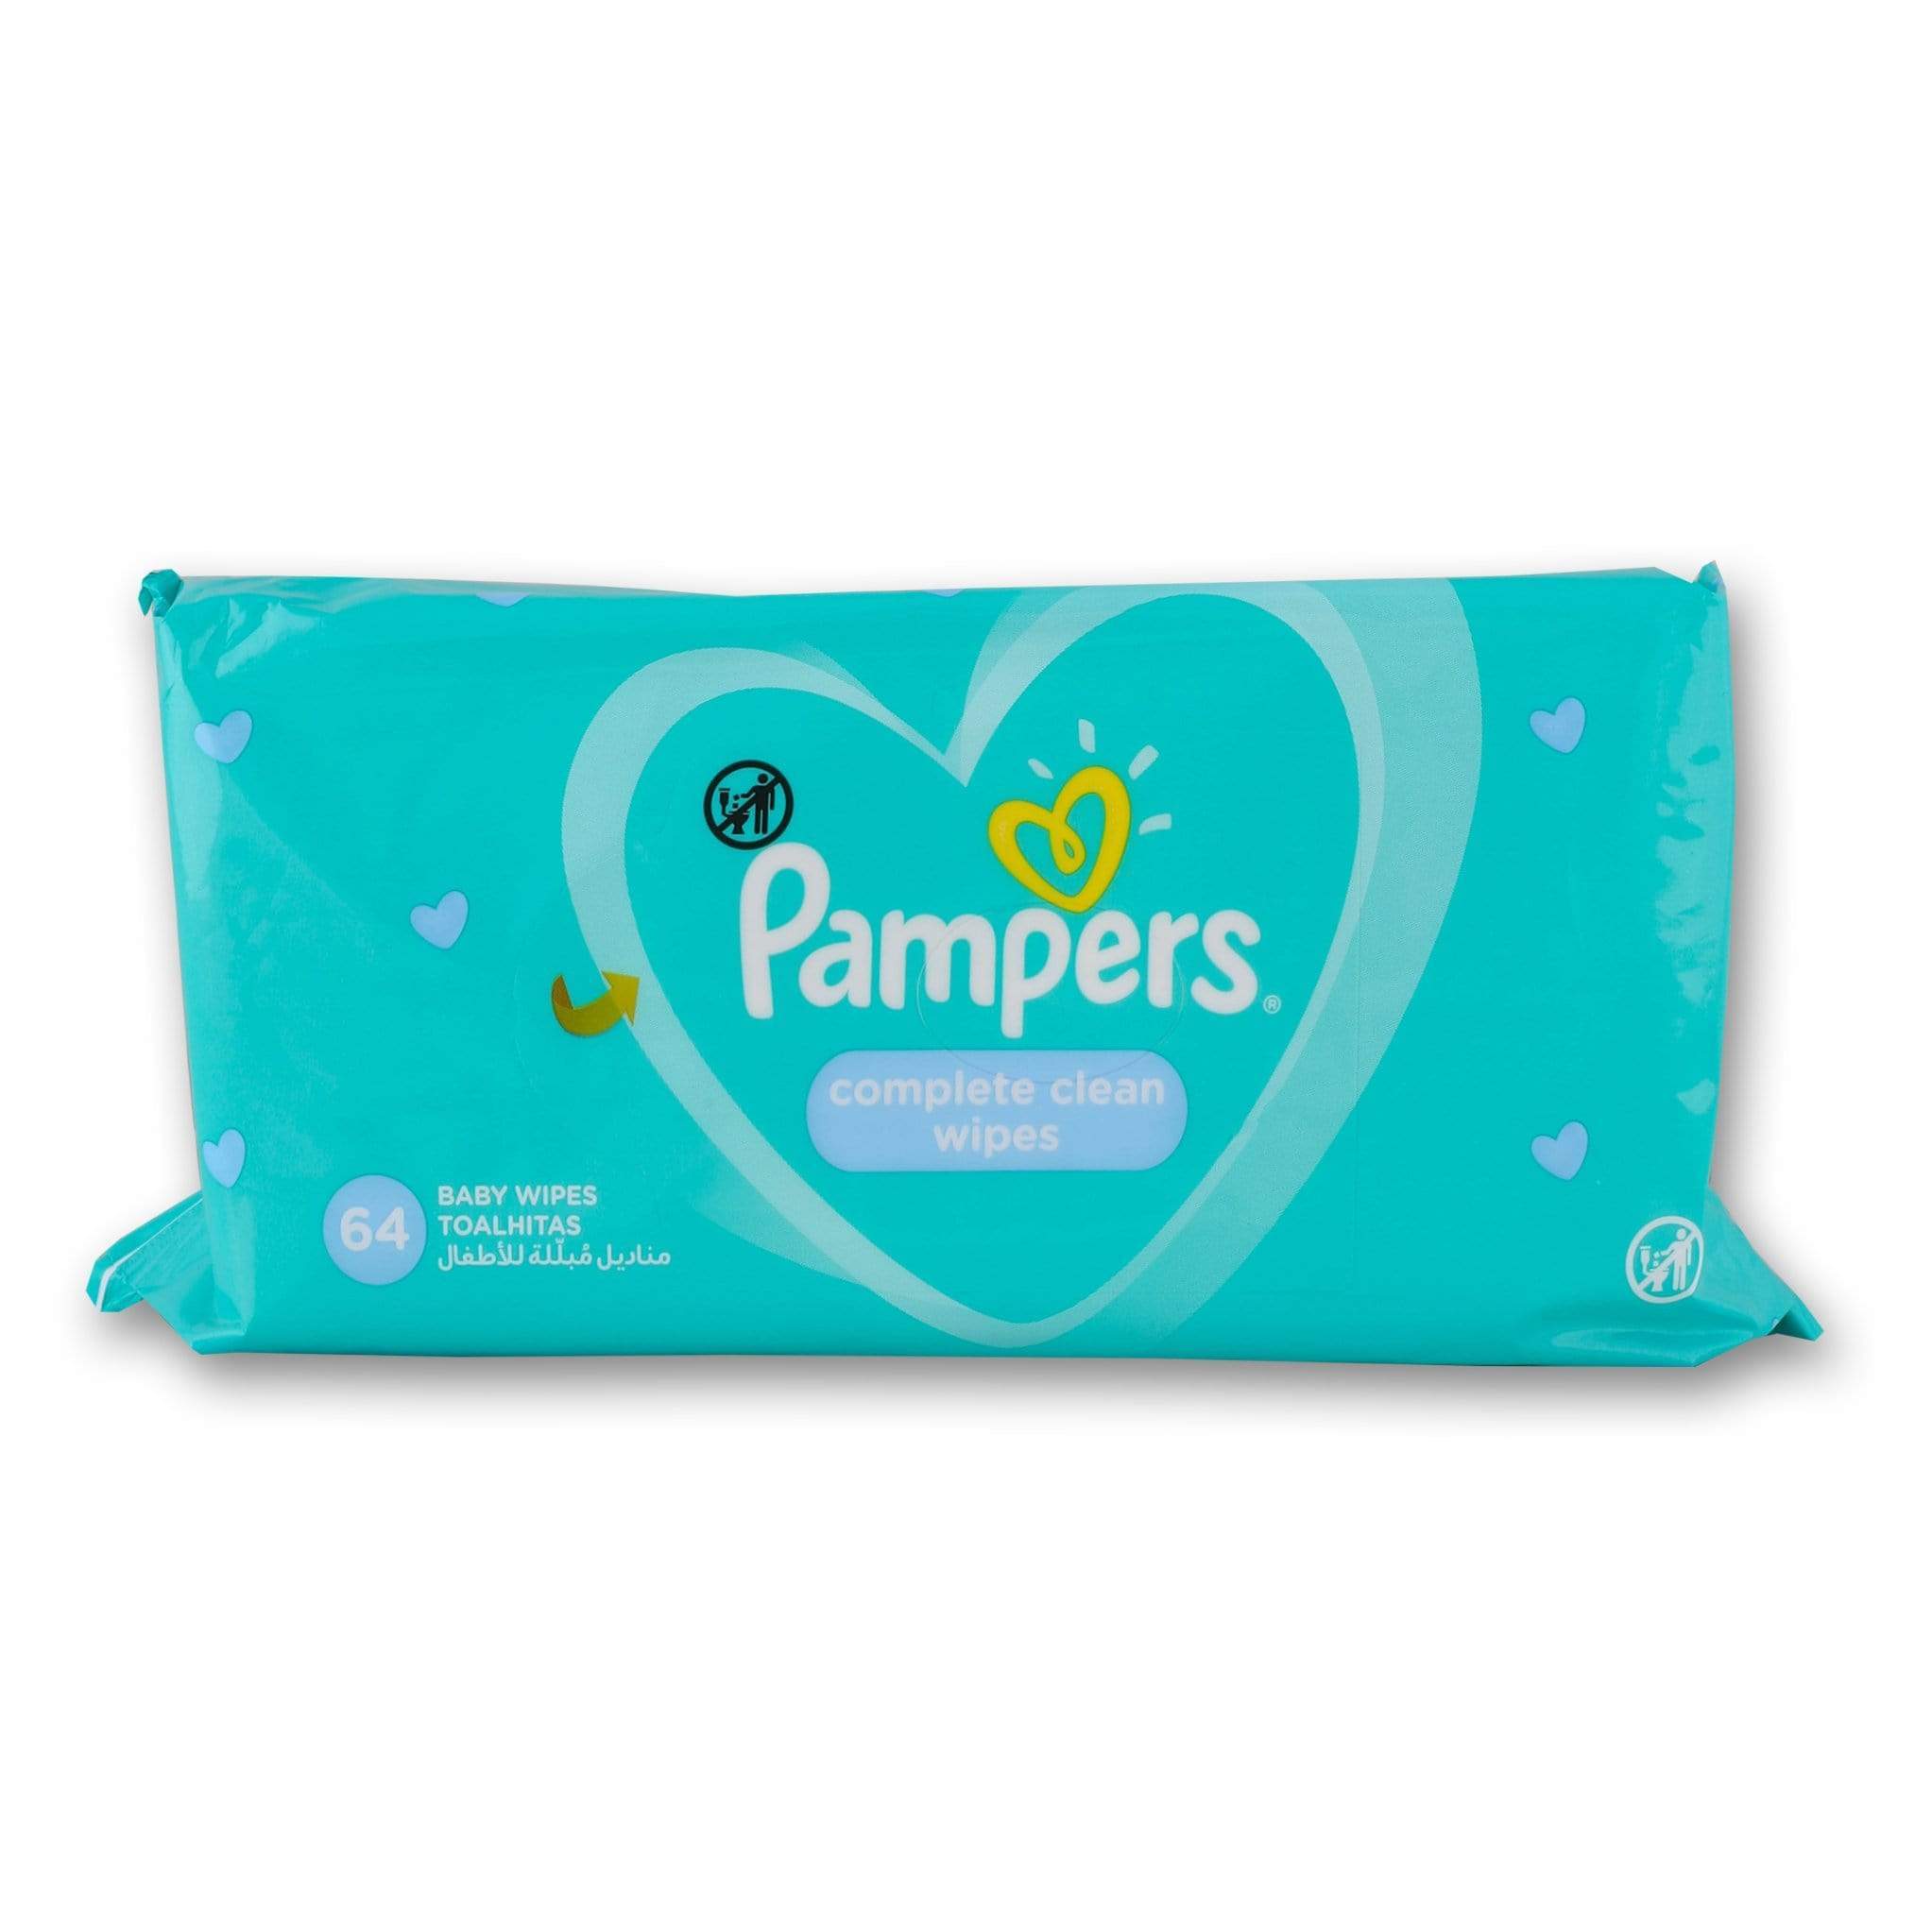 Pampers, Baby Wipes 64's - Cosmetic Connection